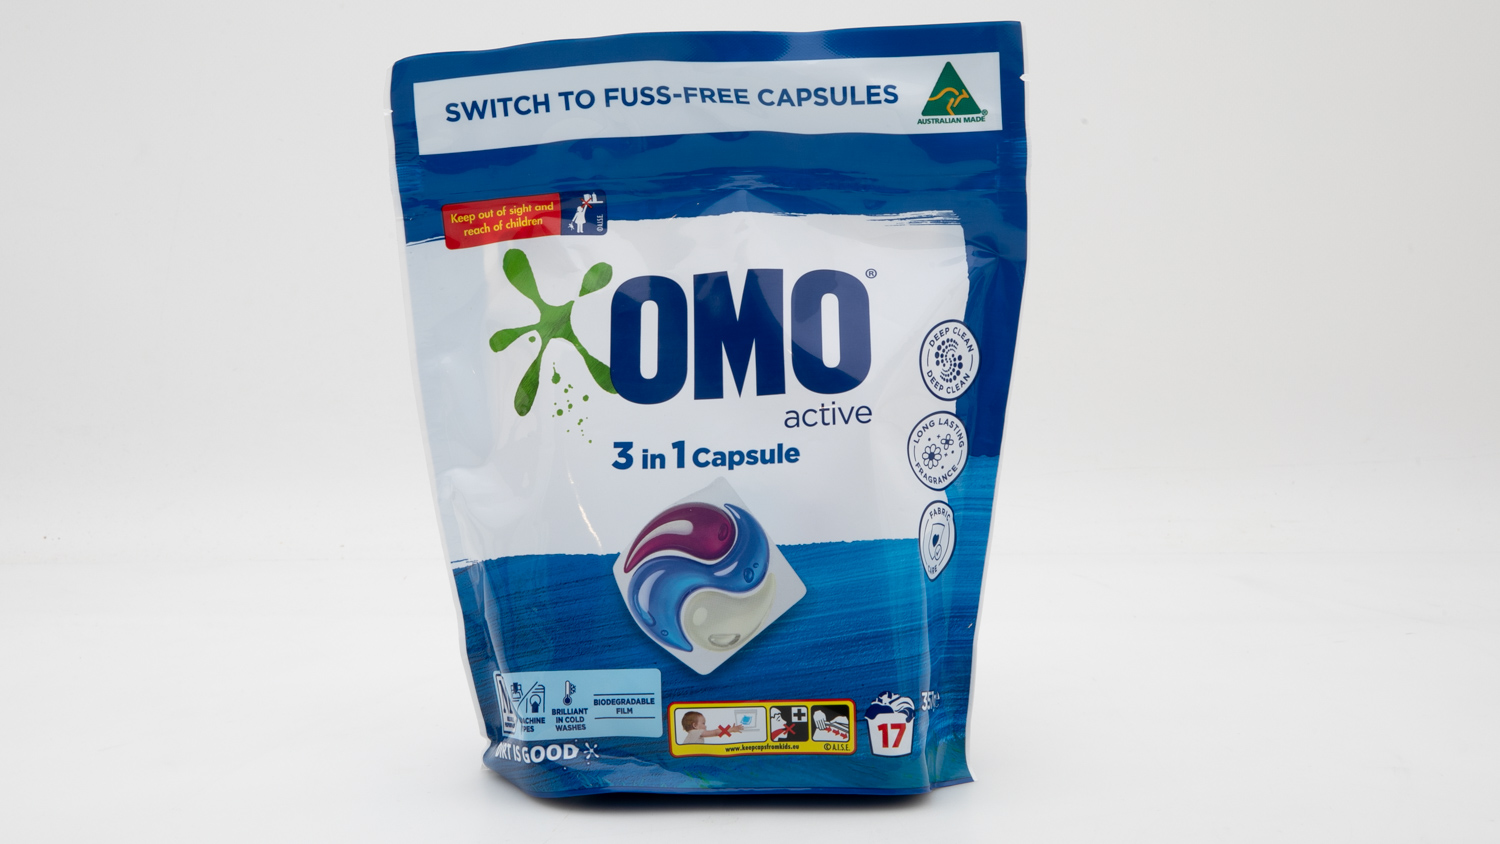 Omo 3 in 1 Active 17 Capsules 357g Front Loader carousel image